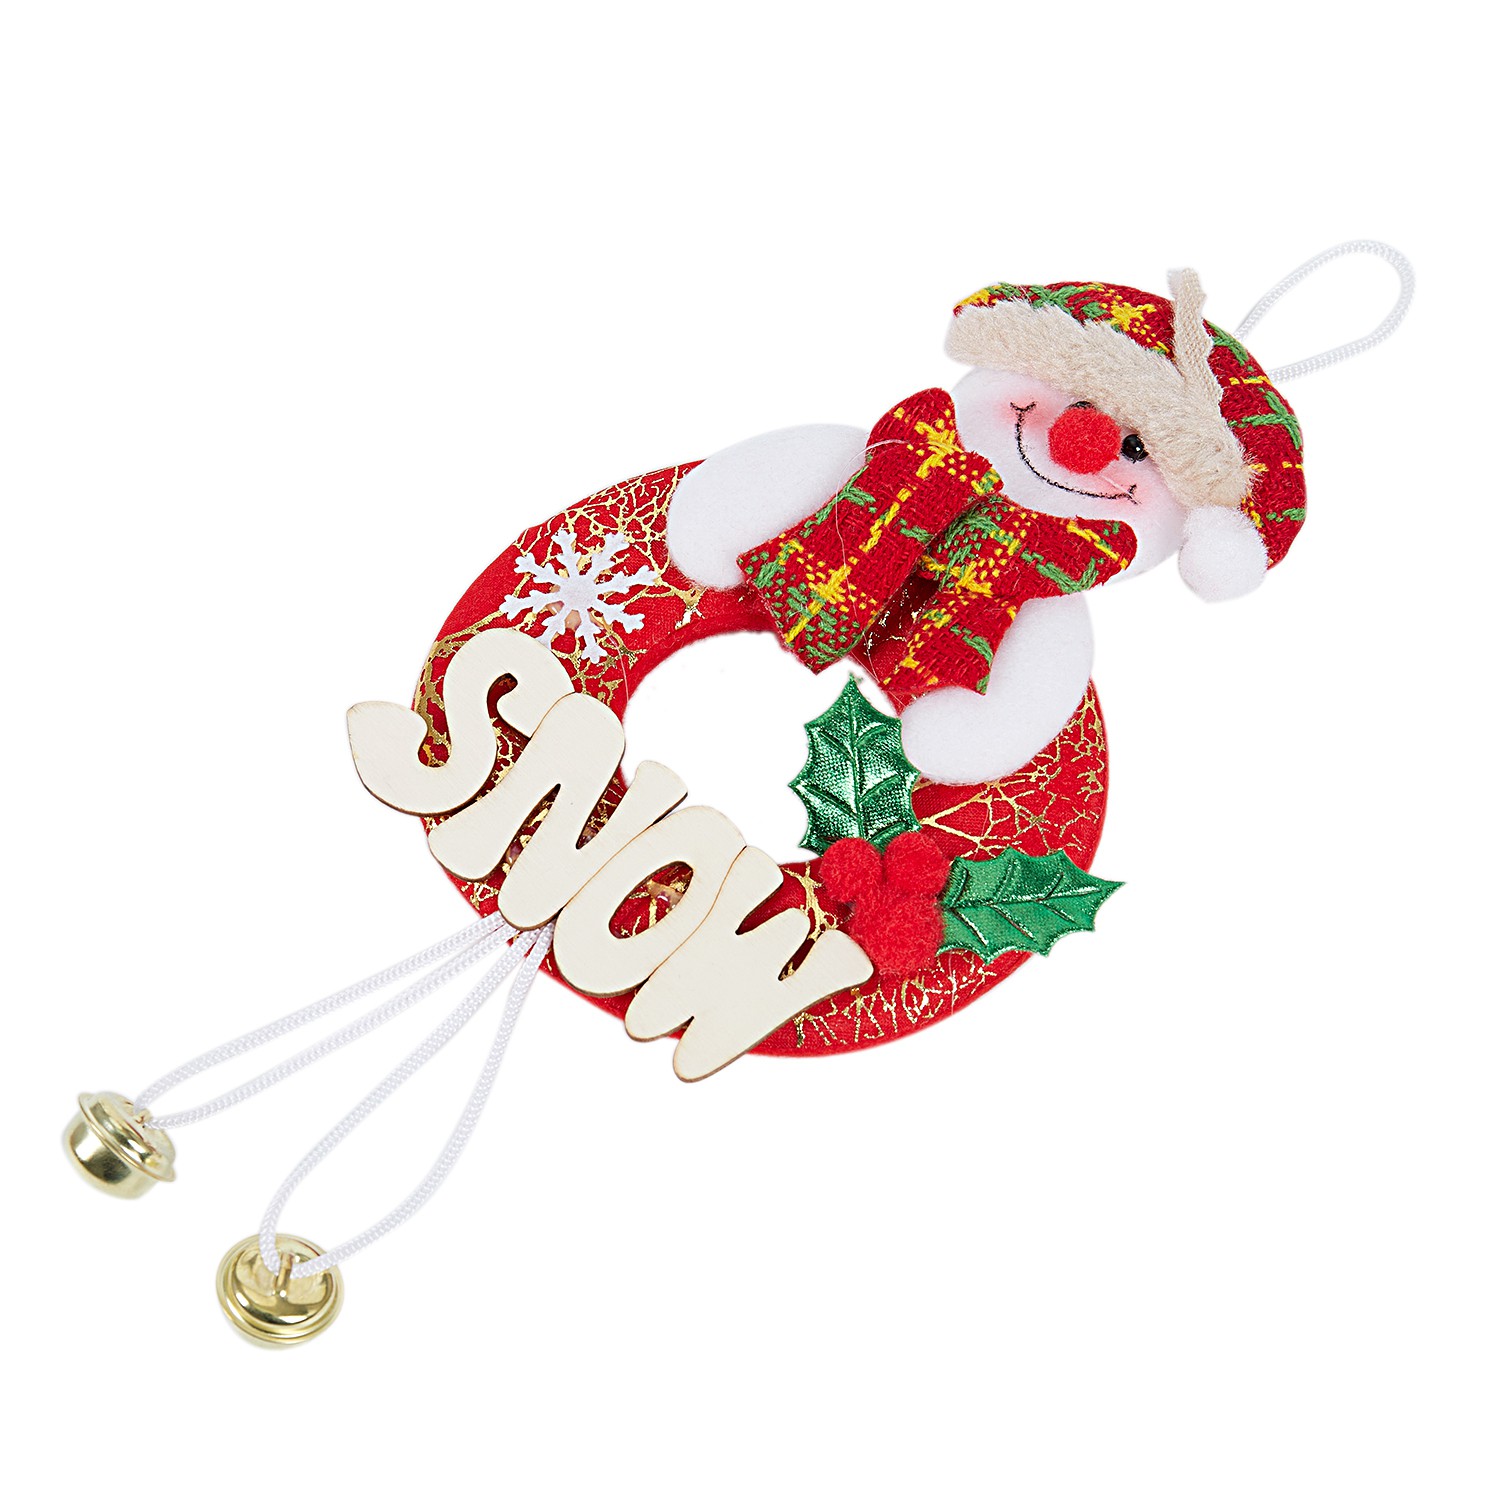 Christmas Bells Decorations For Home Party Snowman Tree S Ornaments Garden Holiday Classical Decor 2 Pack Shopee Indonesia